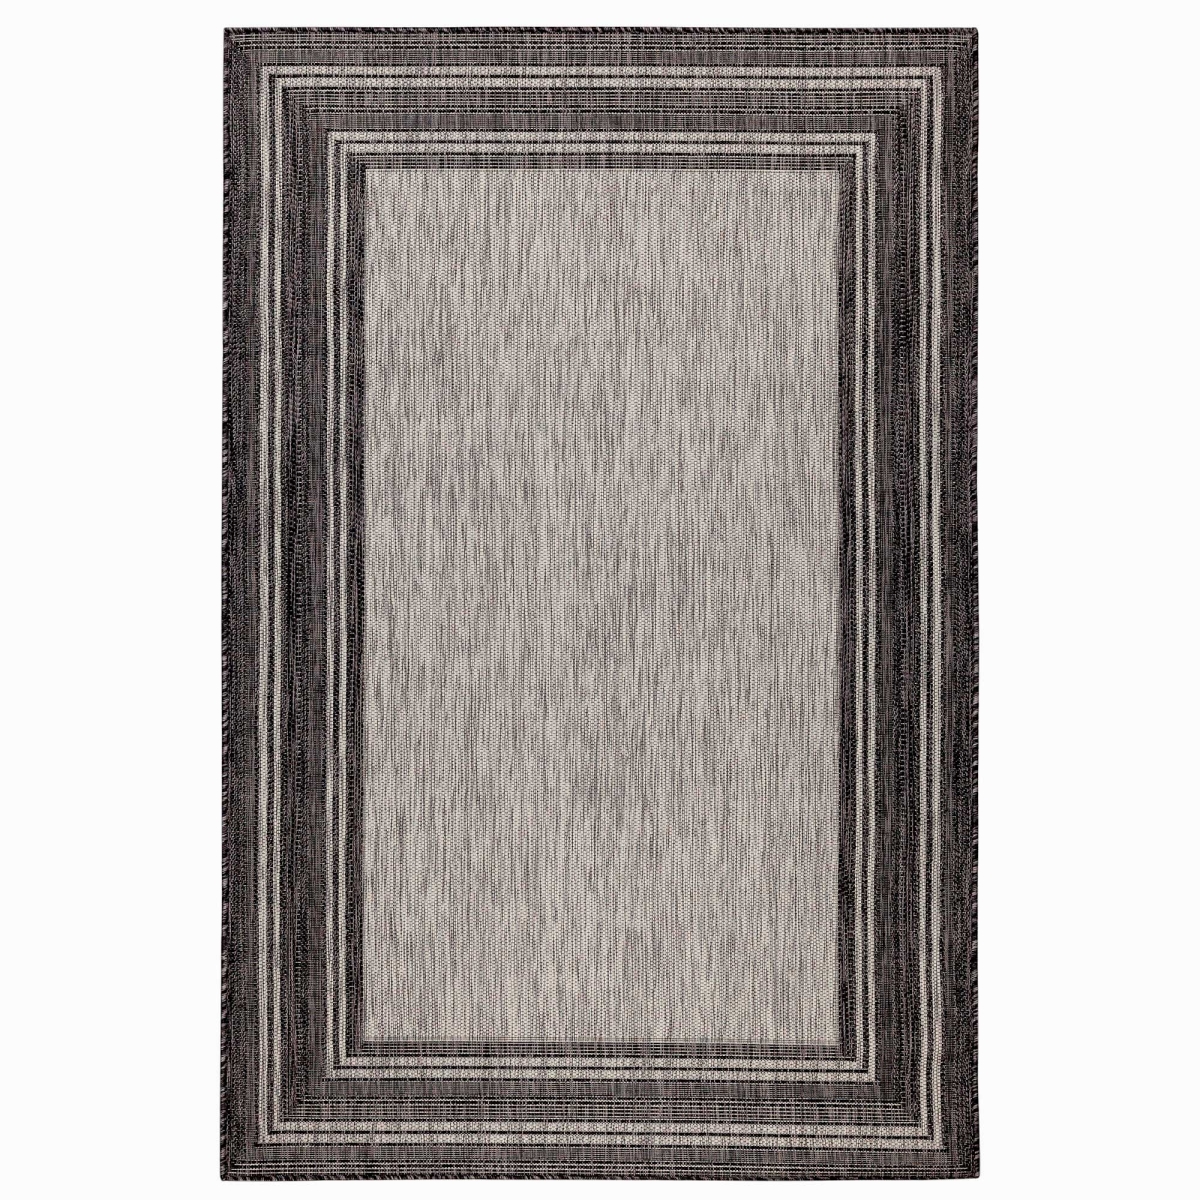 Trans-ocean Imports Cre45842548 39 In. X 59 In. Liora Manne Carmel Multi Border Indoor & Outdoor Wilton Woven Rectangle Rug - Black